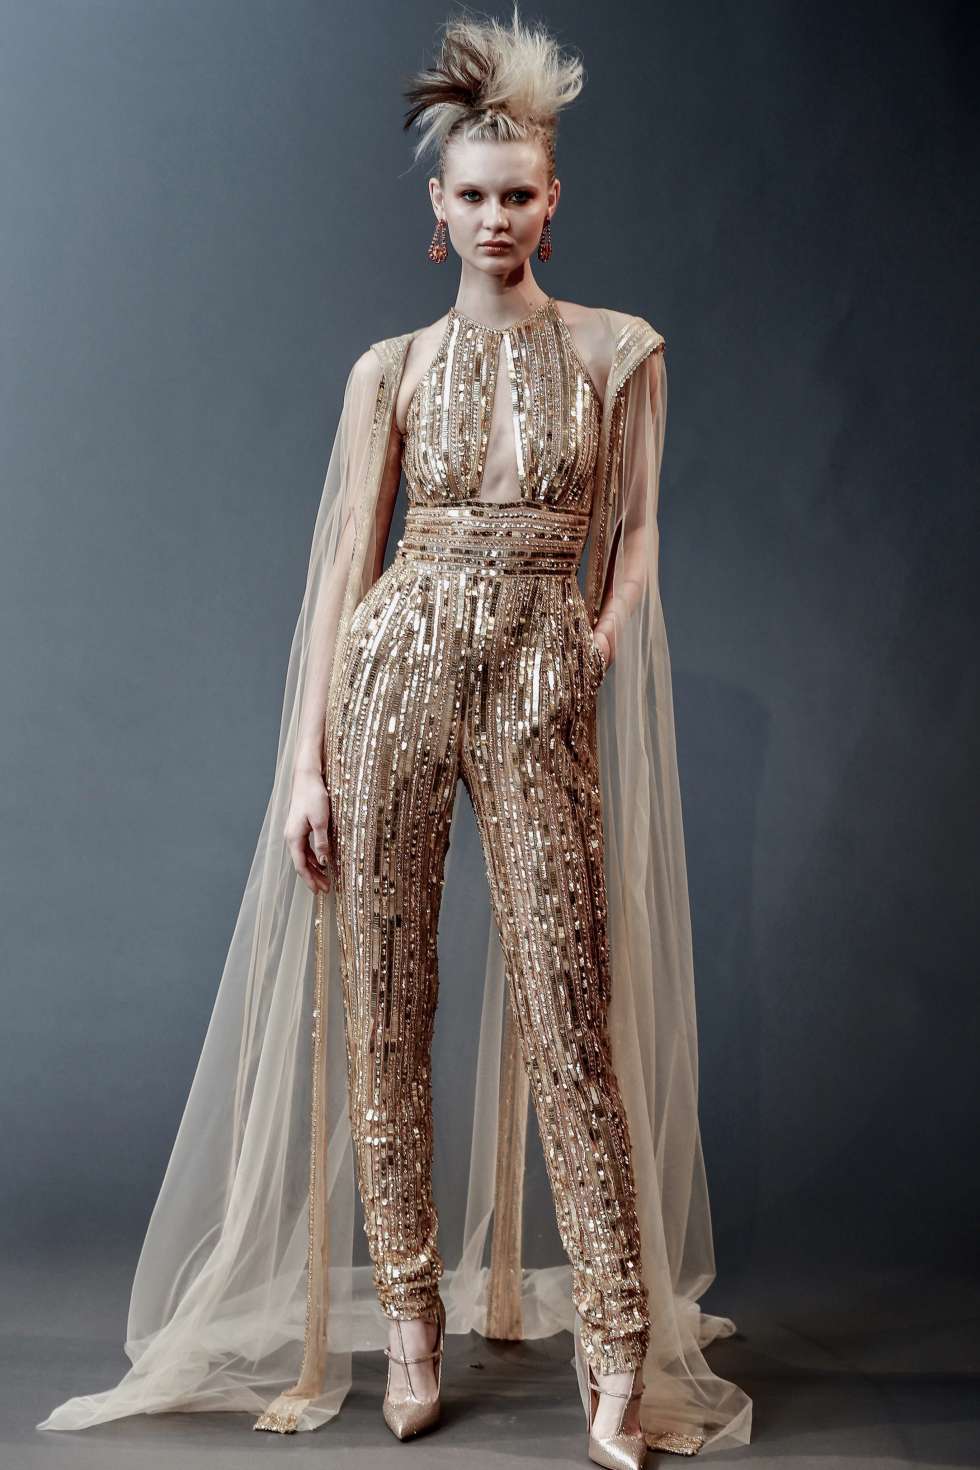 The 2019 Spring Wedding Dress Collection by Naeem Khan